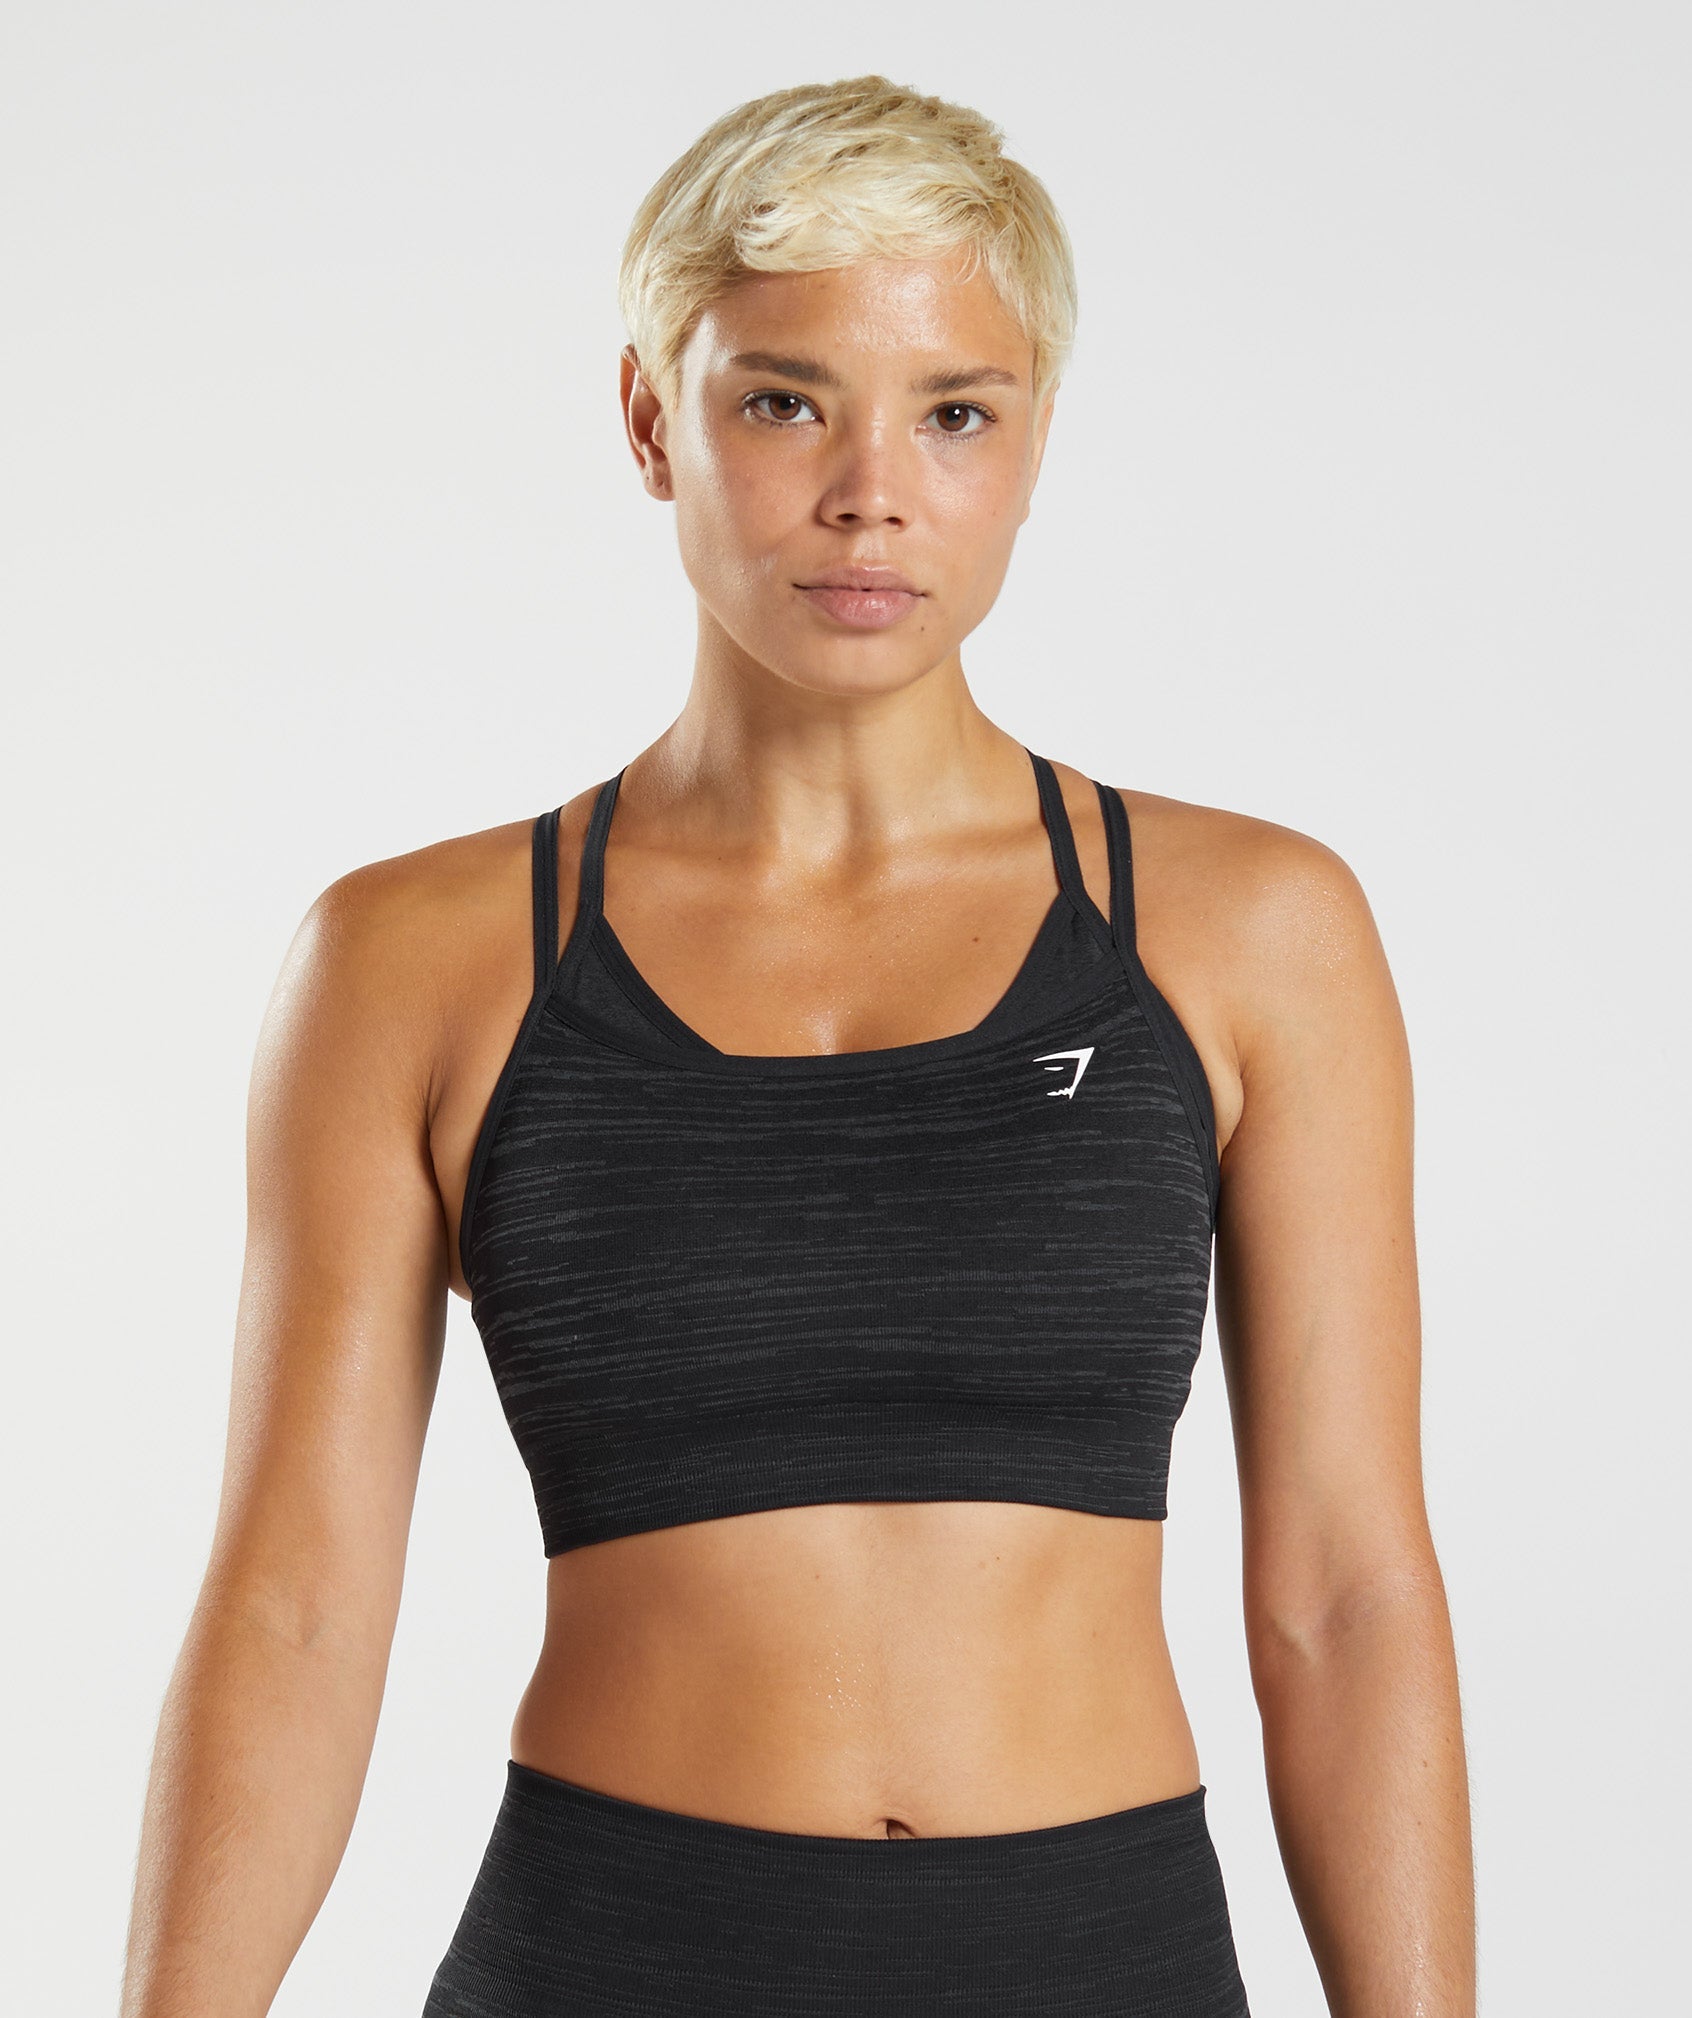 Gymshark Women's Work Out Gym Top Sports Bra Size Large